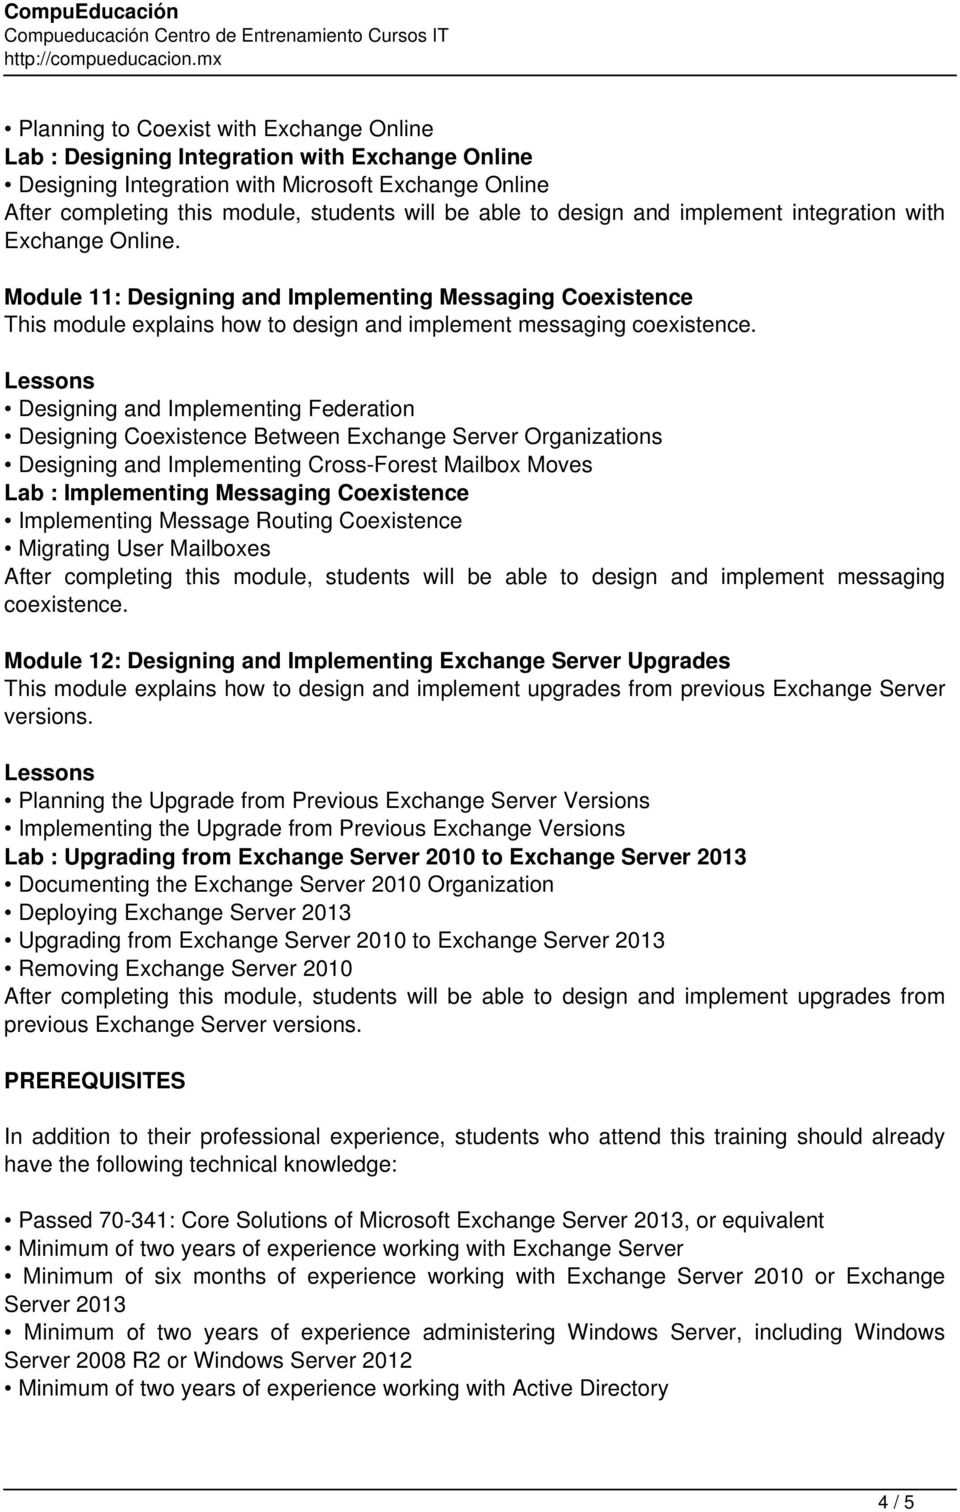 Designing and Implementing Federation Designing Coexistence Between Exchange Server Organizations Designing and Implementing Cross-Forest Mailbox Moves Lab : Implementing Messaging Coexistence